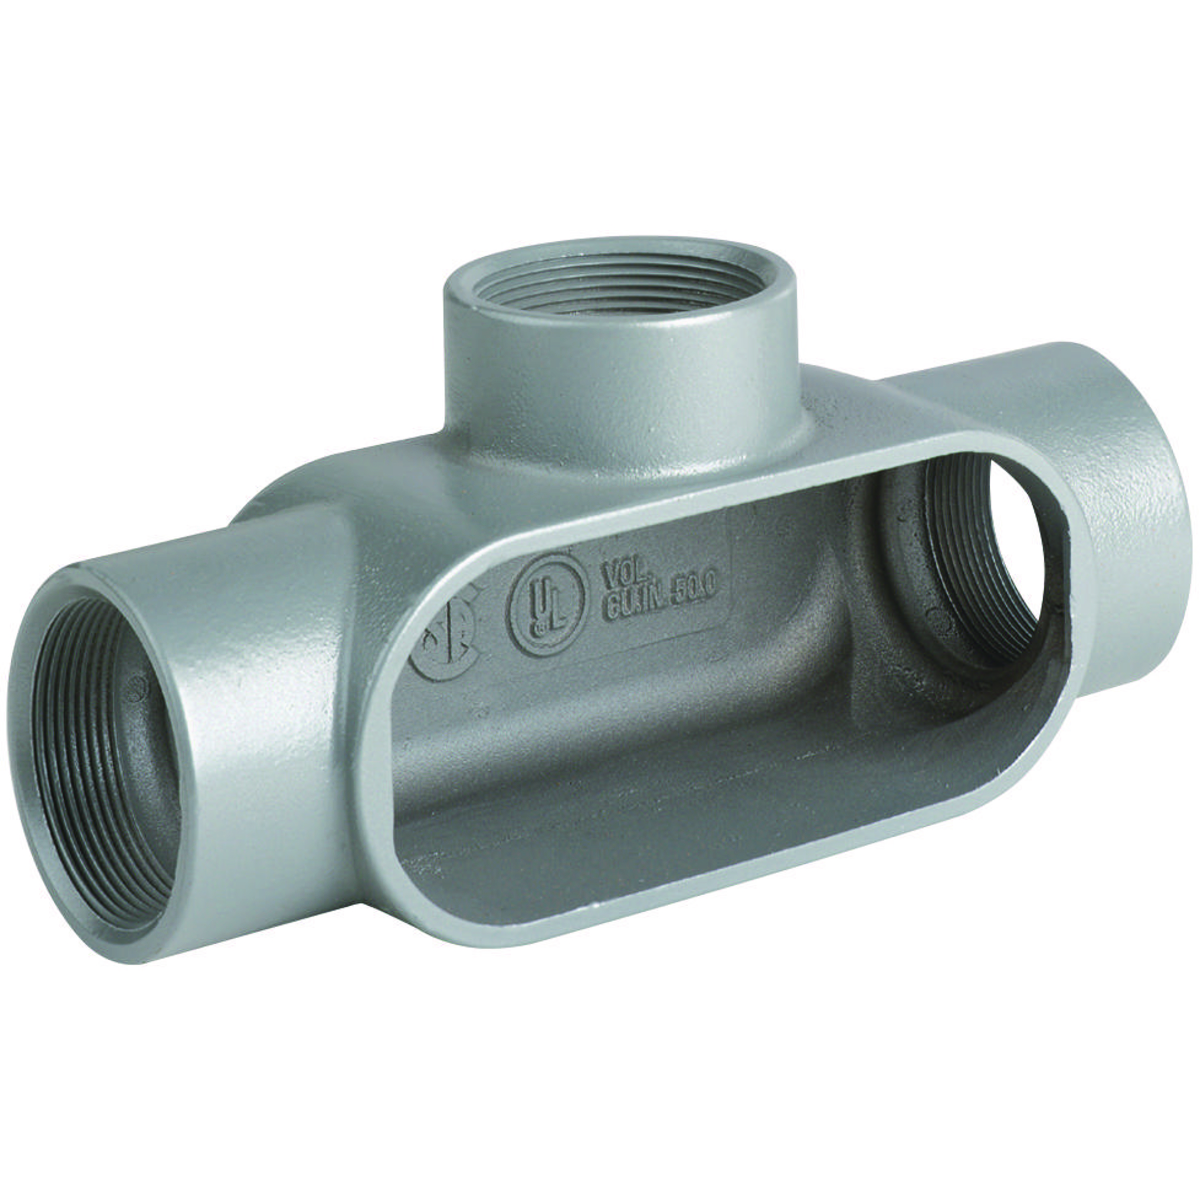 DURALOY 7 SERIES - IRON CONDUIT BODY - T TYPE - HUB SIZE 1-1/4 INCH -VOLUME 20.0 CUBIC INCHES